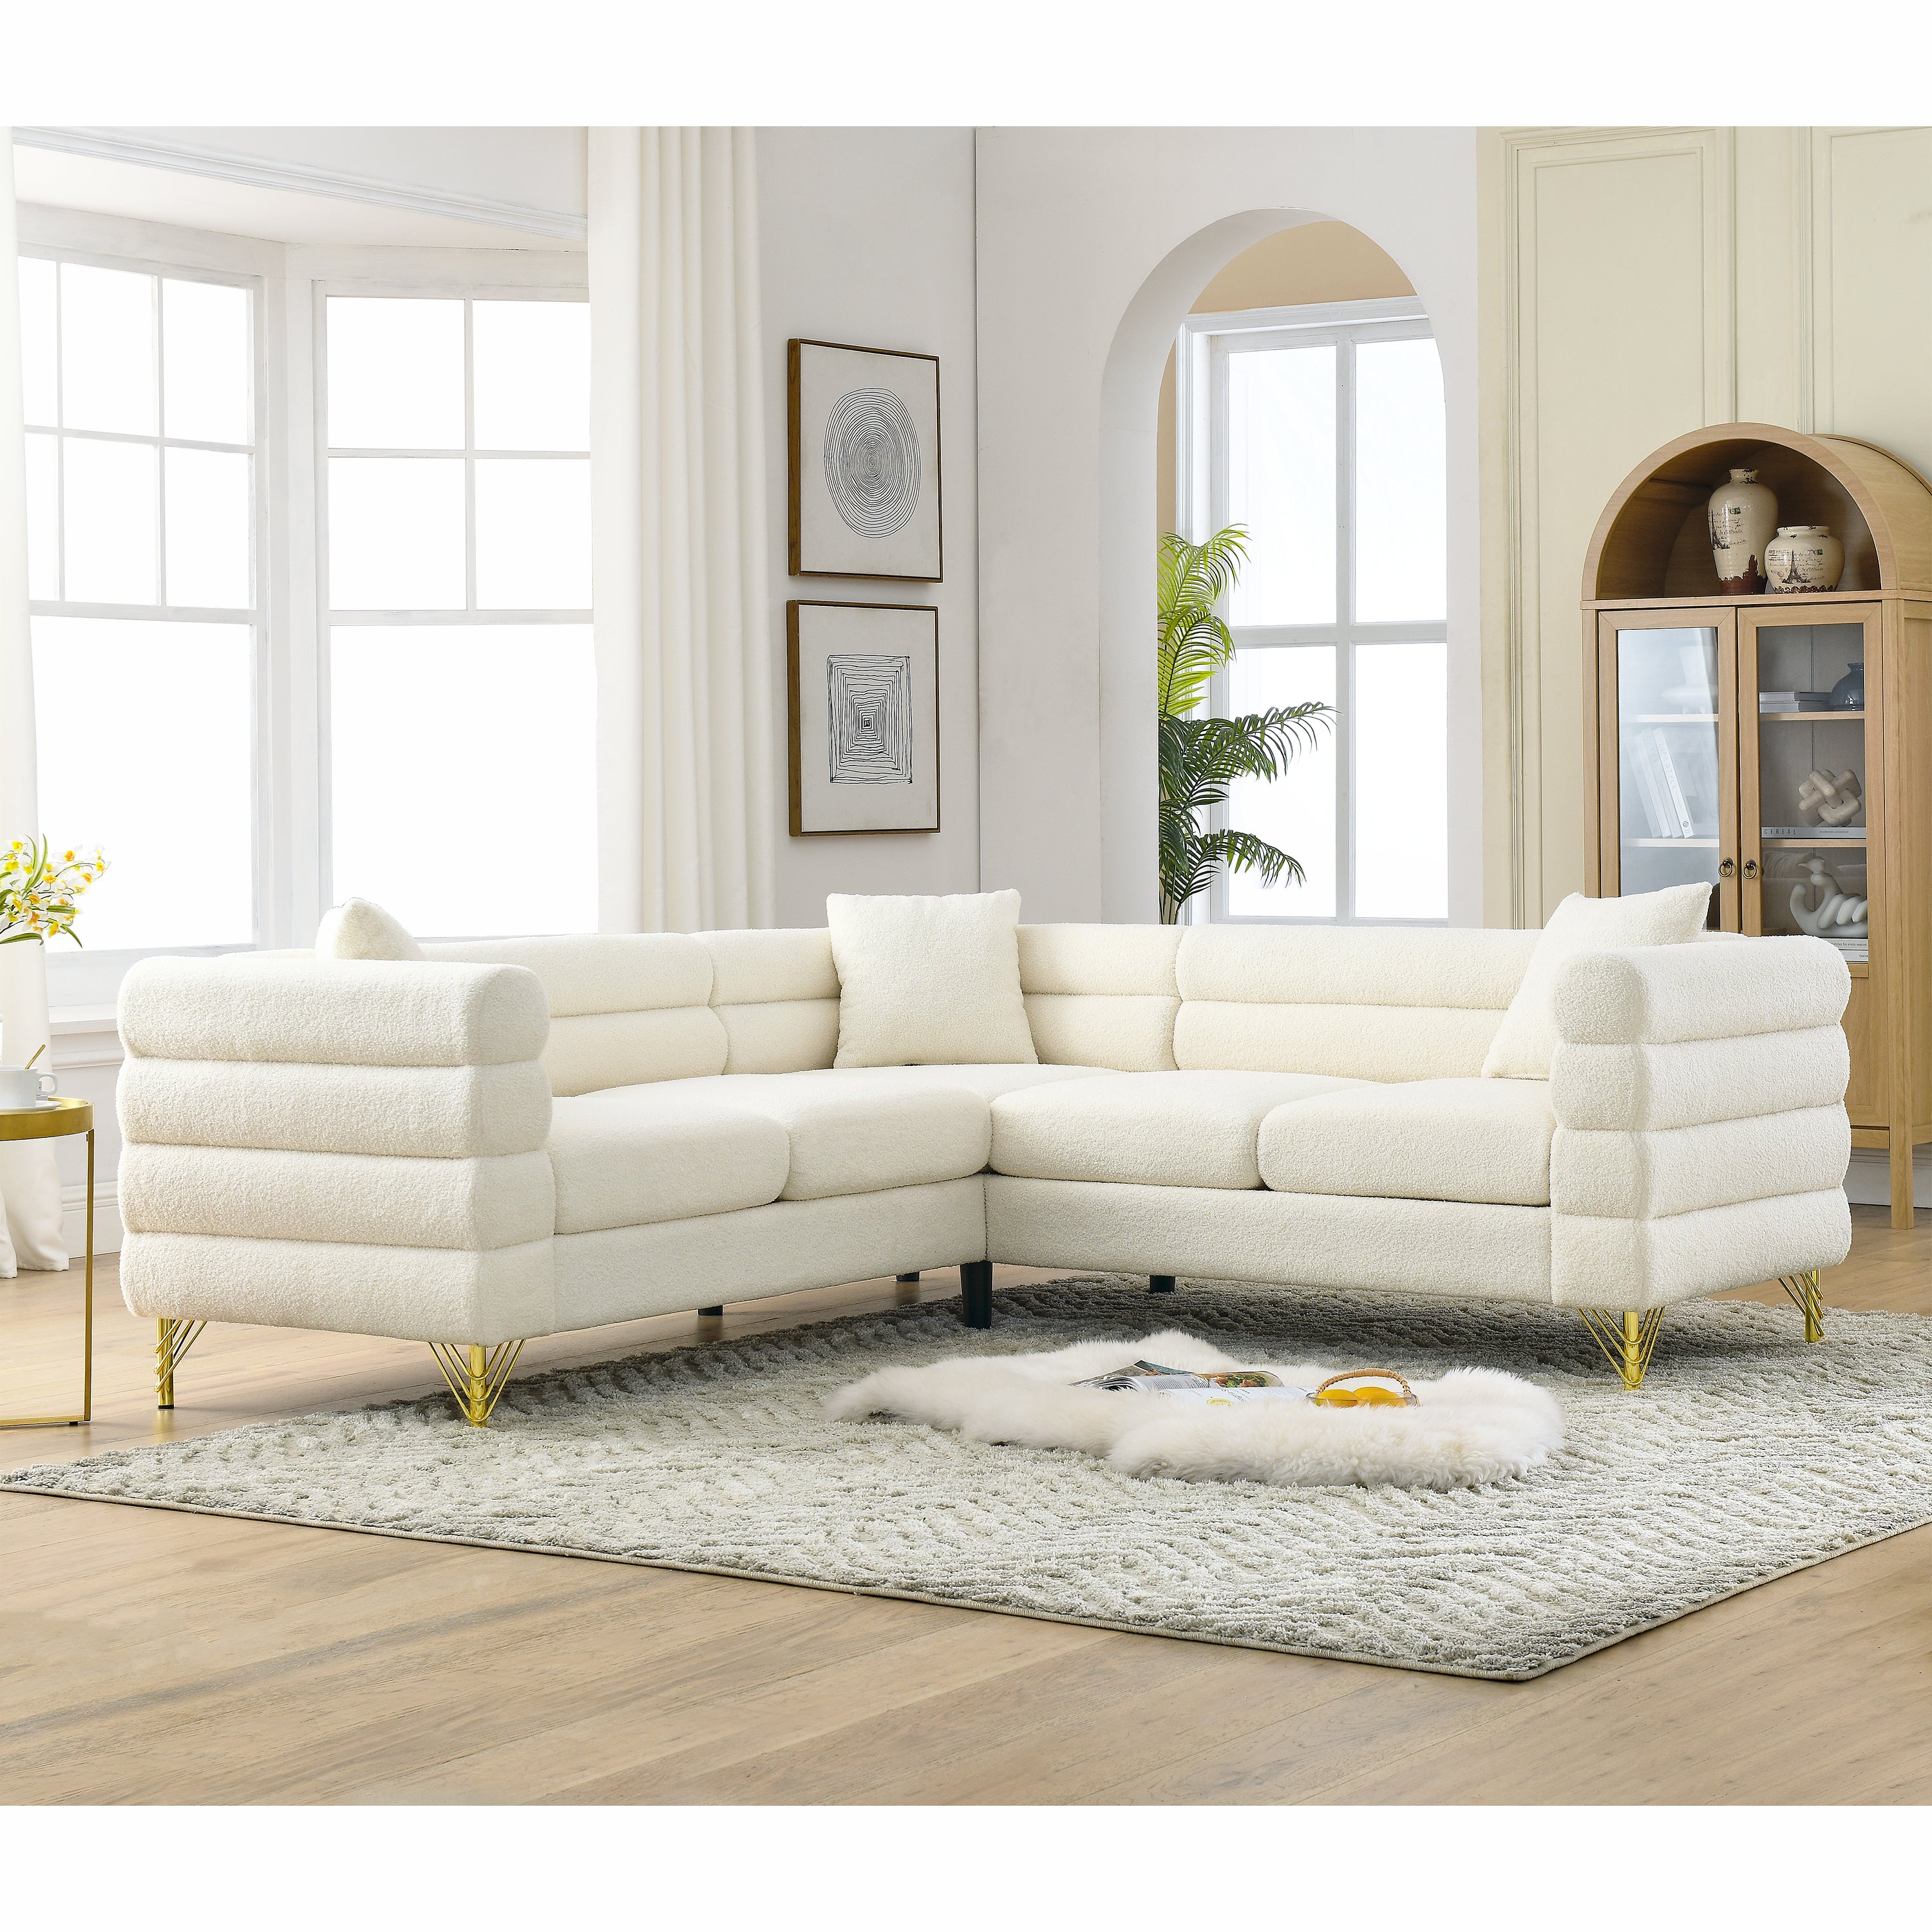 Lorenzi  beige Boucle Fabric Upholstered Sectional Sofa with Gold metal Legs